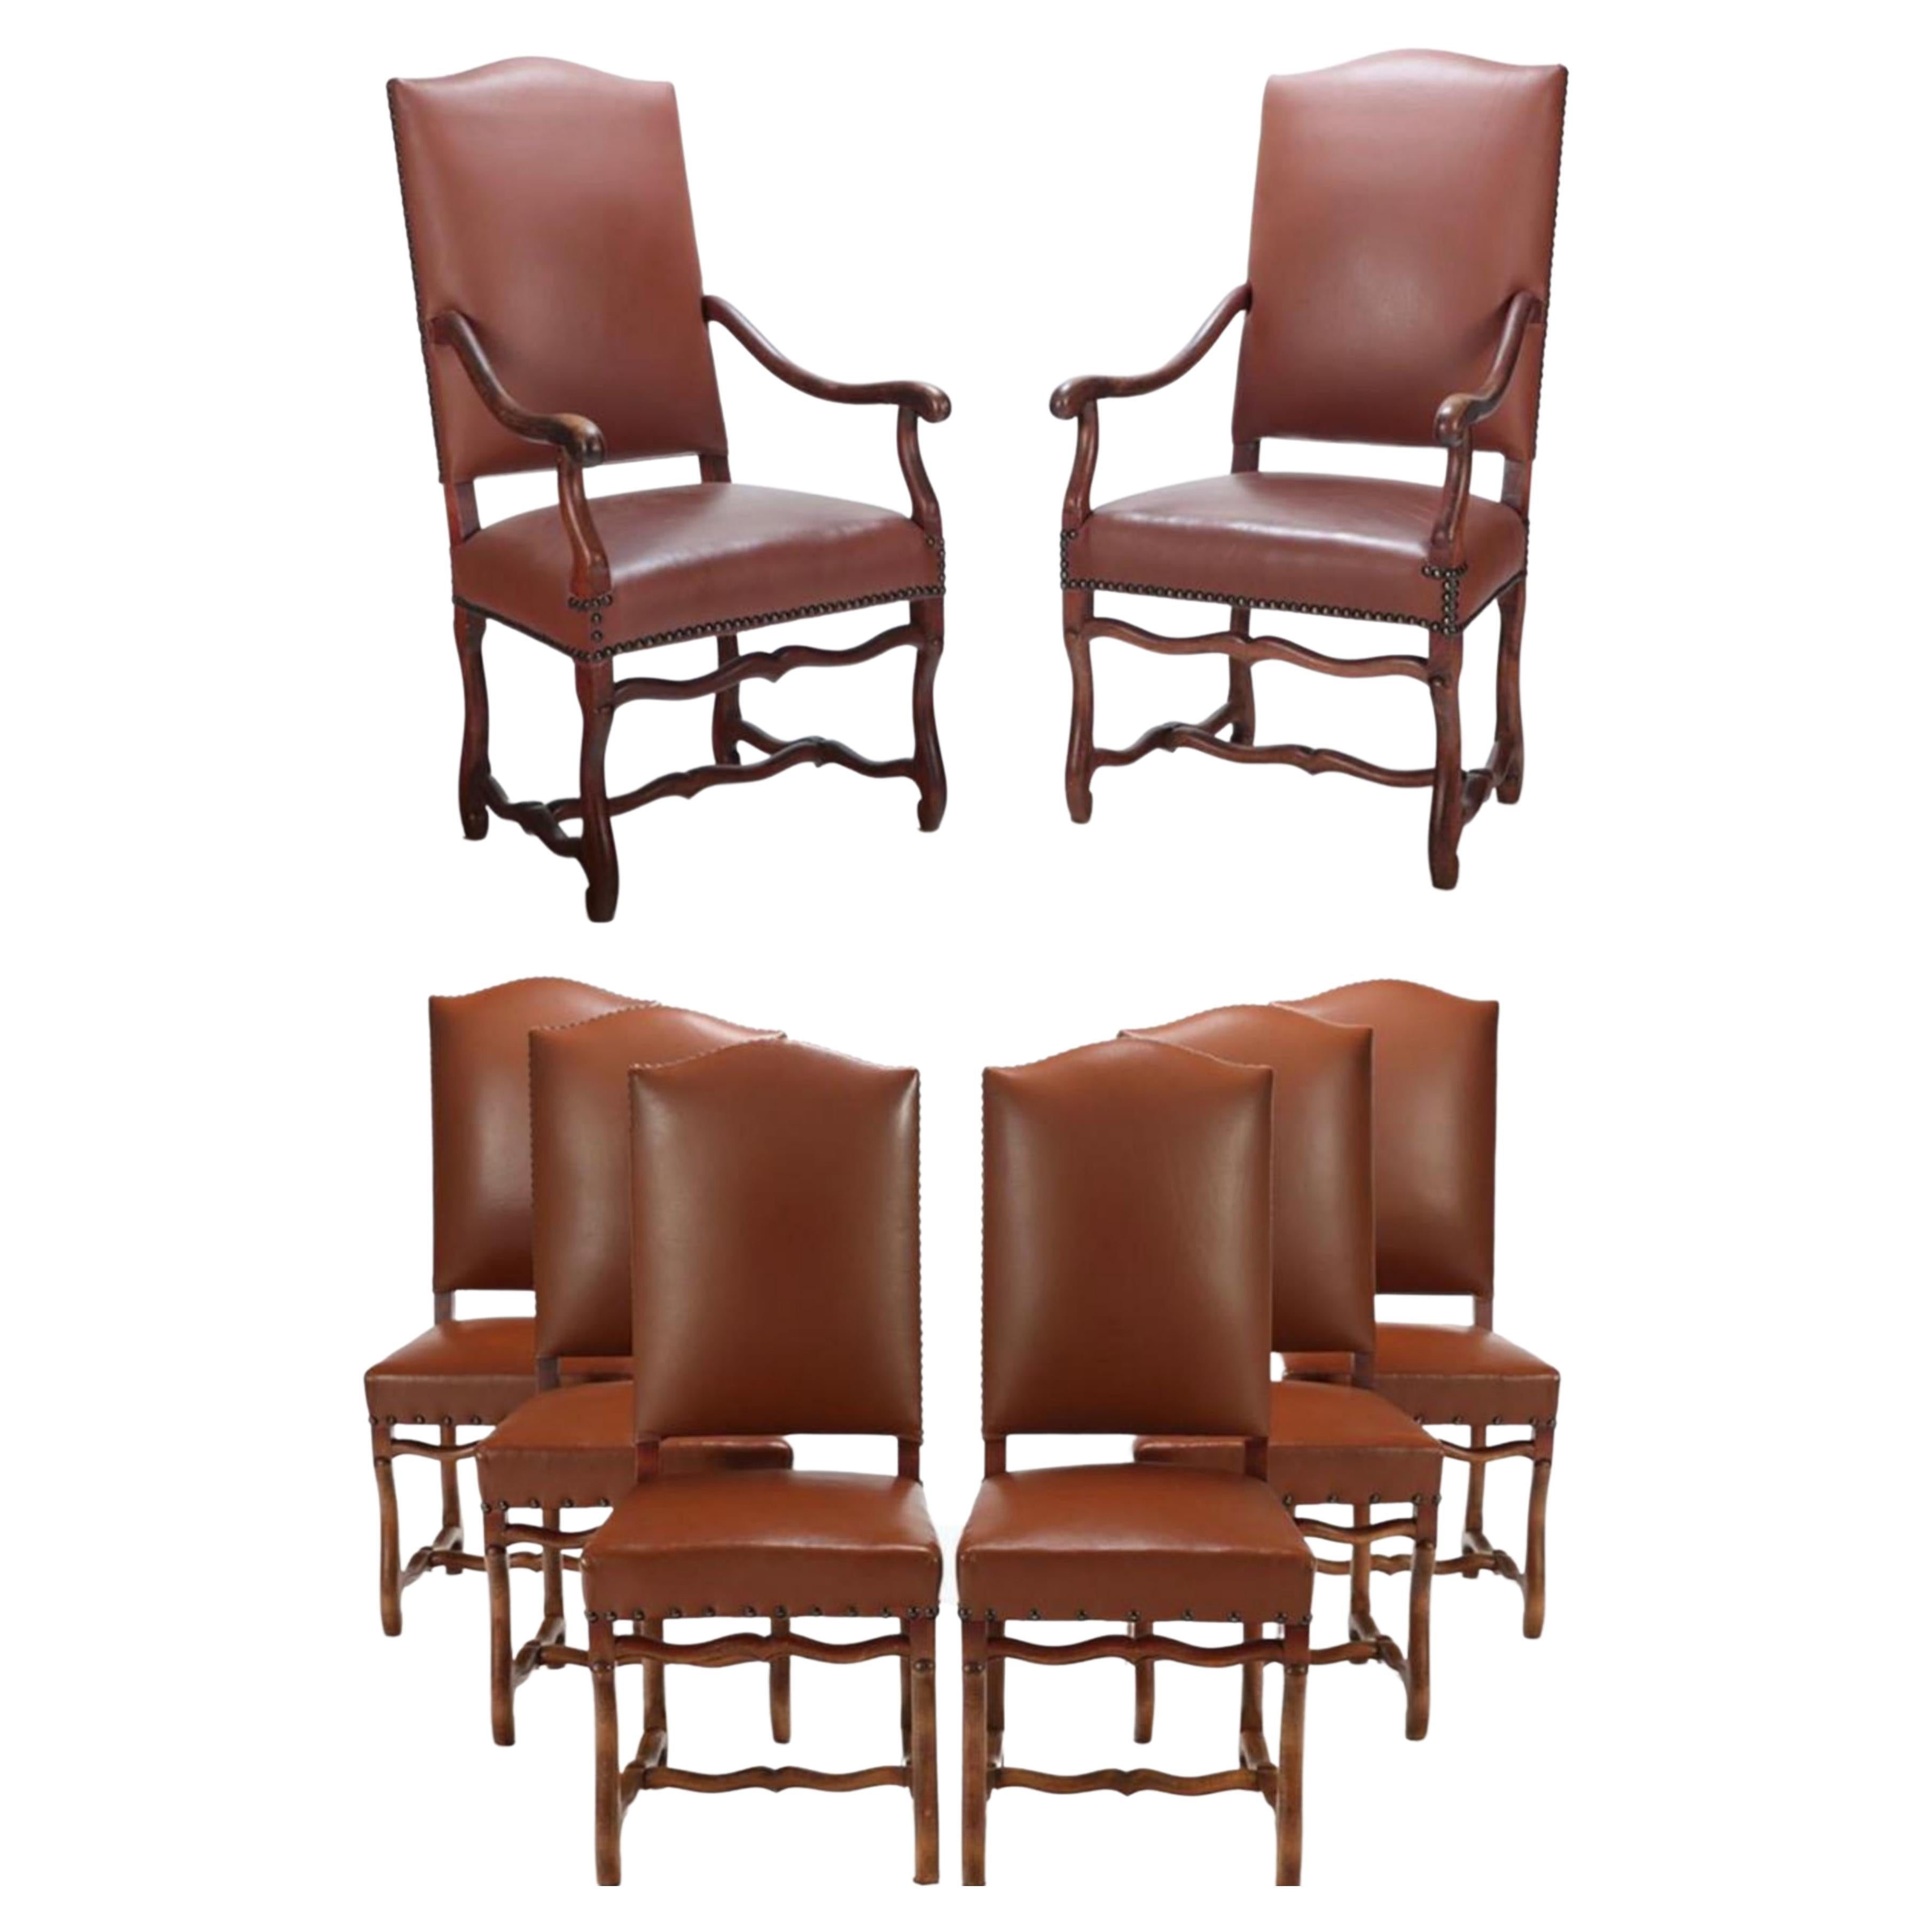 Set of Eight Early 20th Century French Beech Wood & Leather Dining Chairs